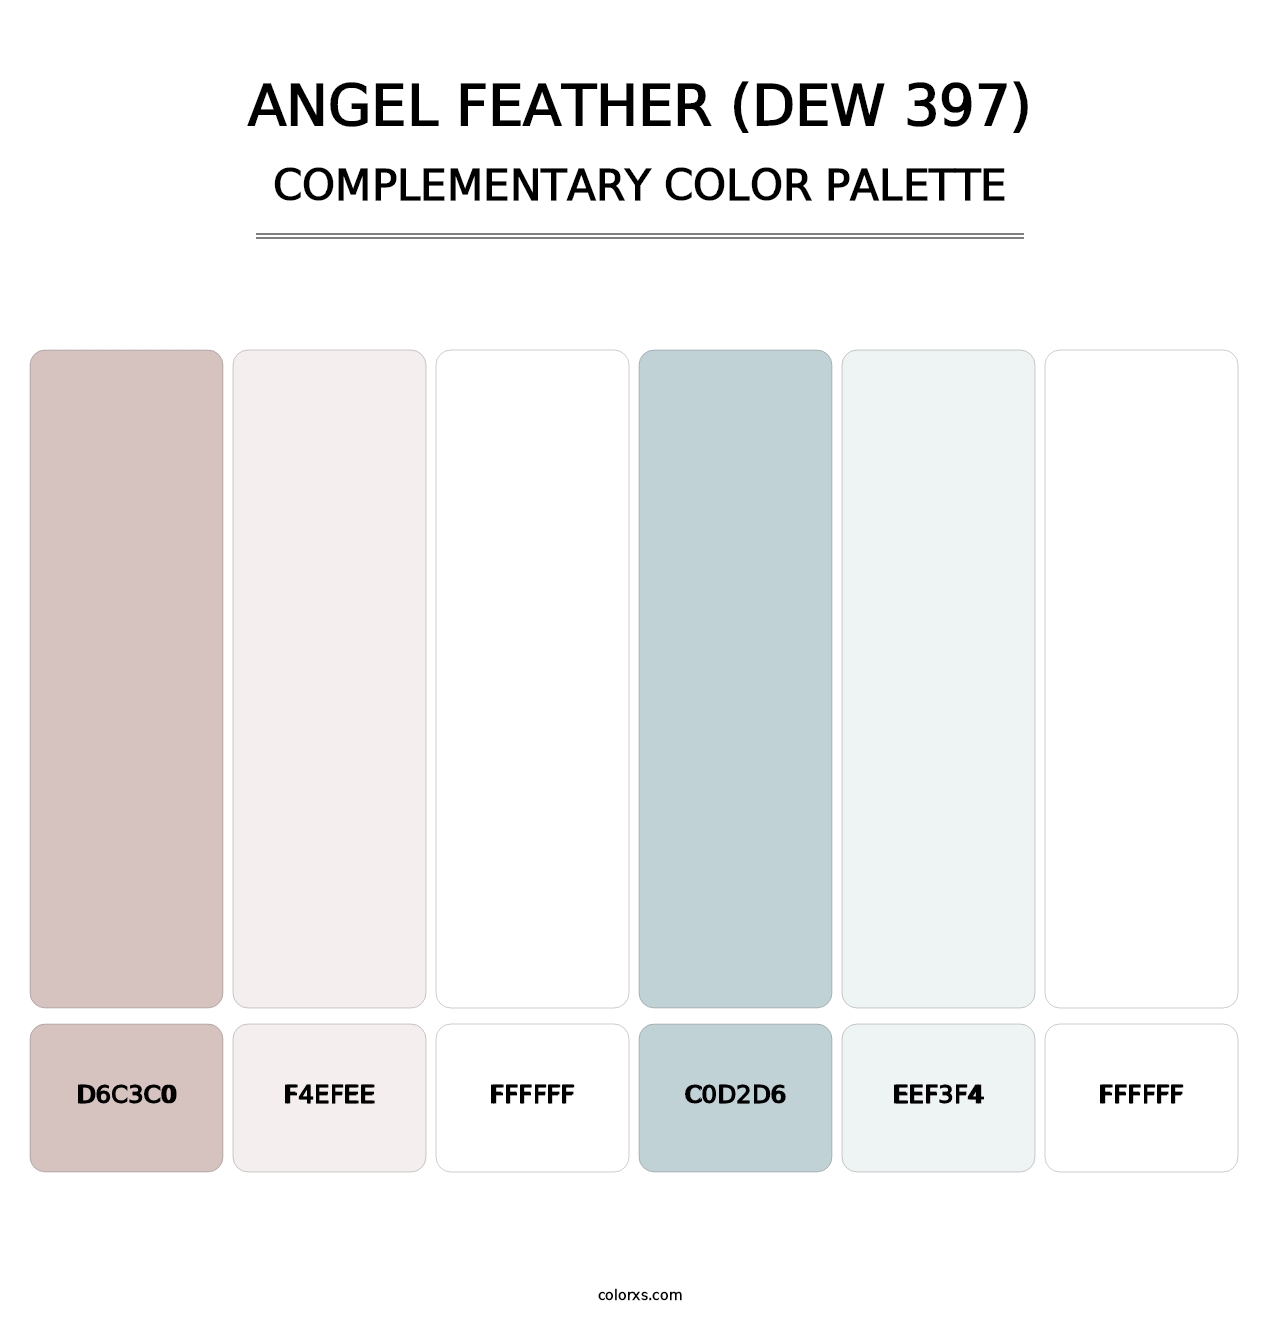 Angel Feather (DEW 397) - Complementary Color Palette